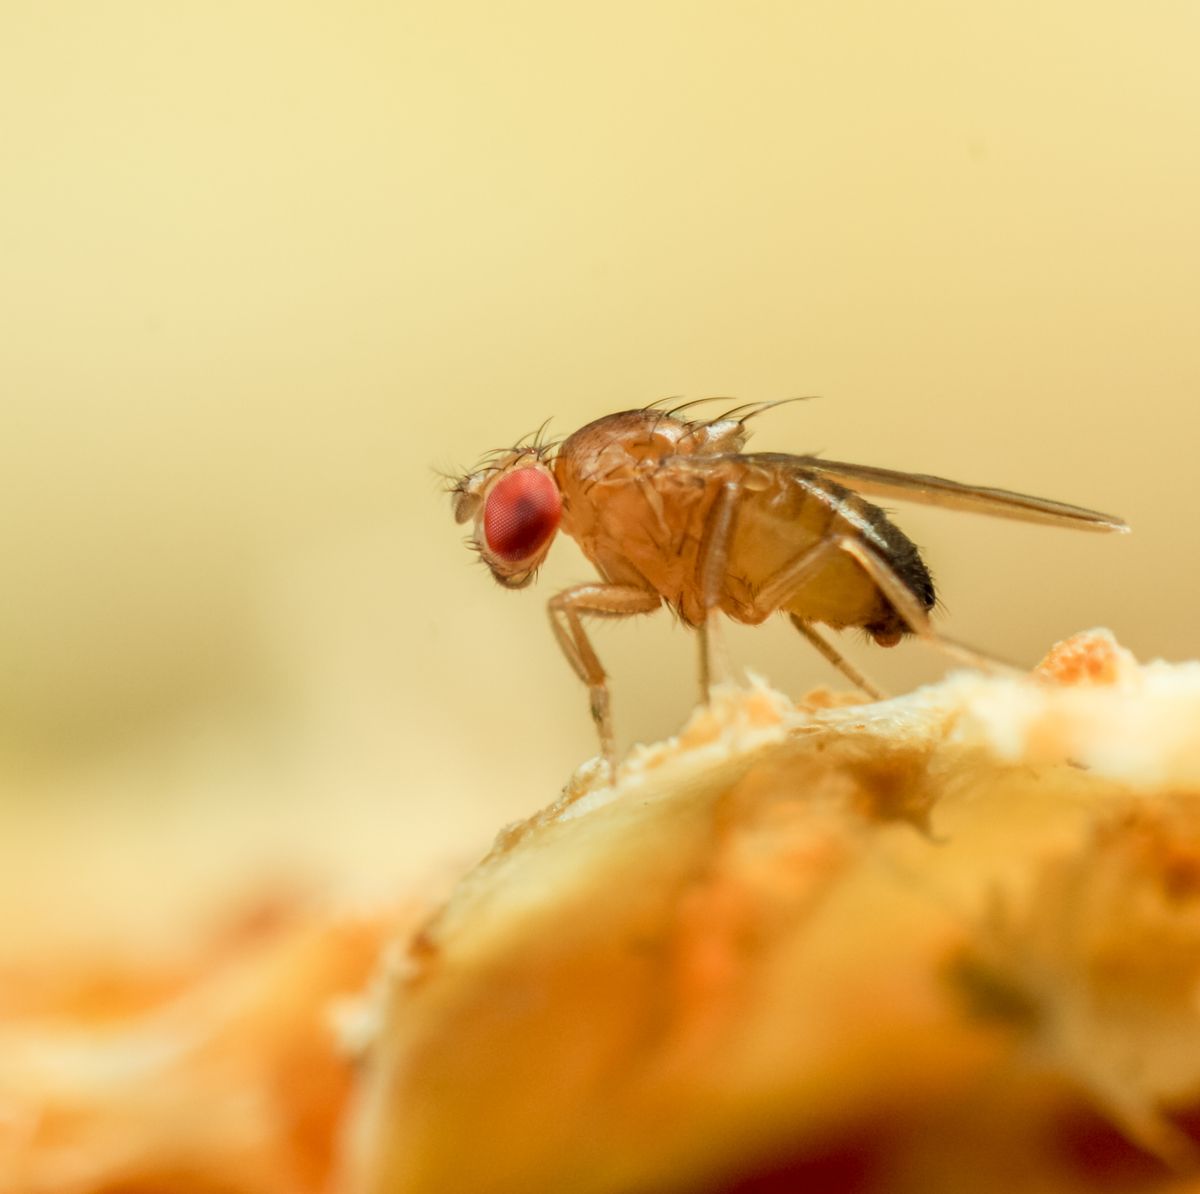 How to Kill Fruit Flies in Your Drain - How to Get Rid of Fruit Flies